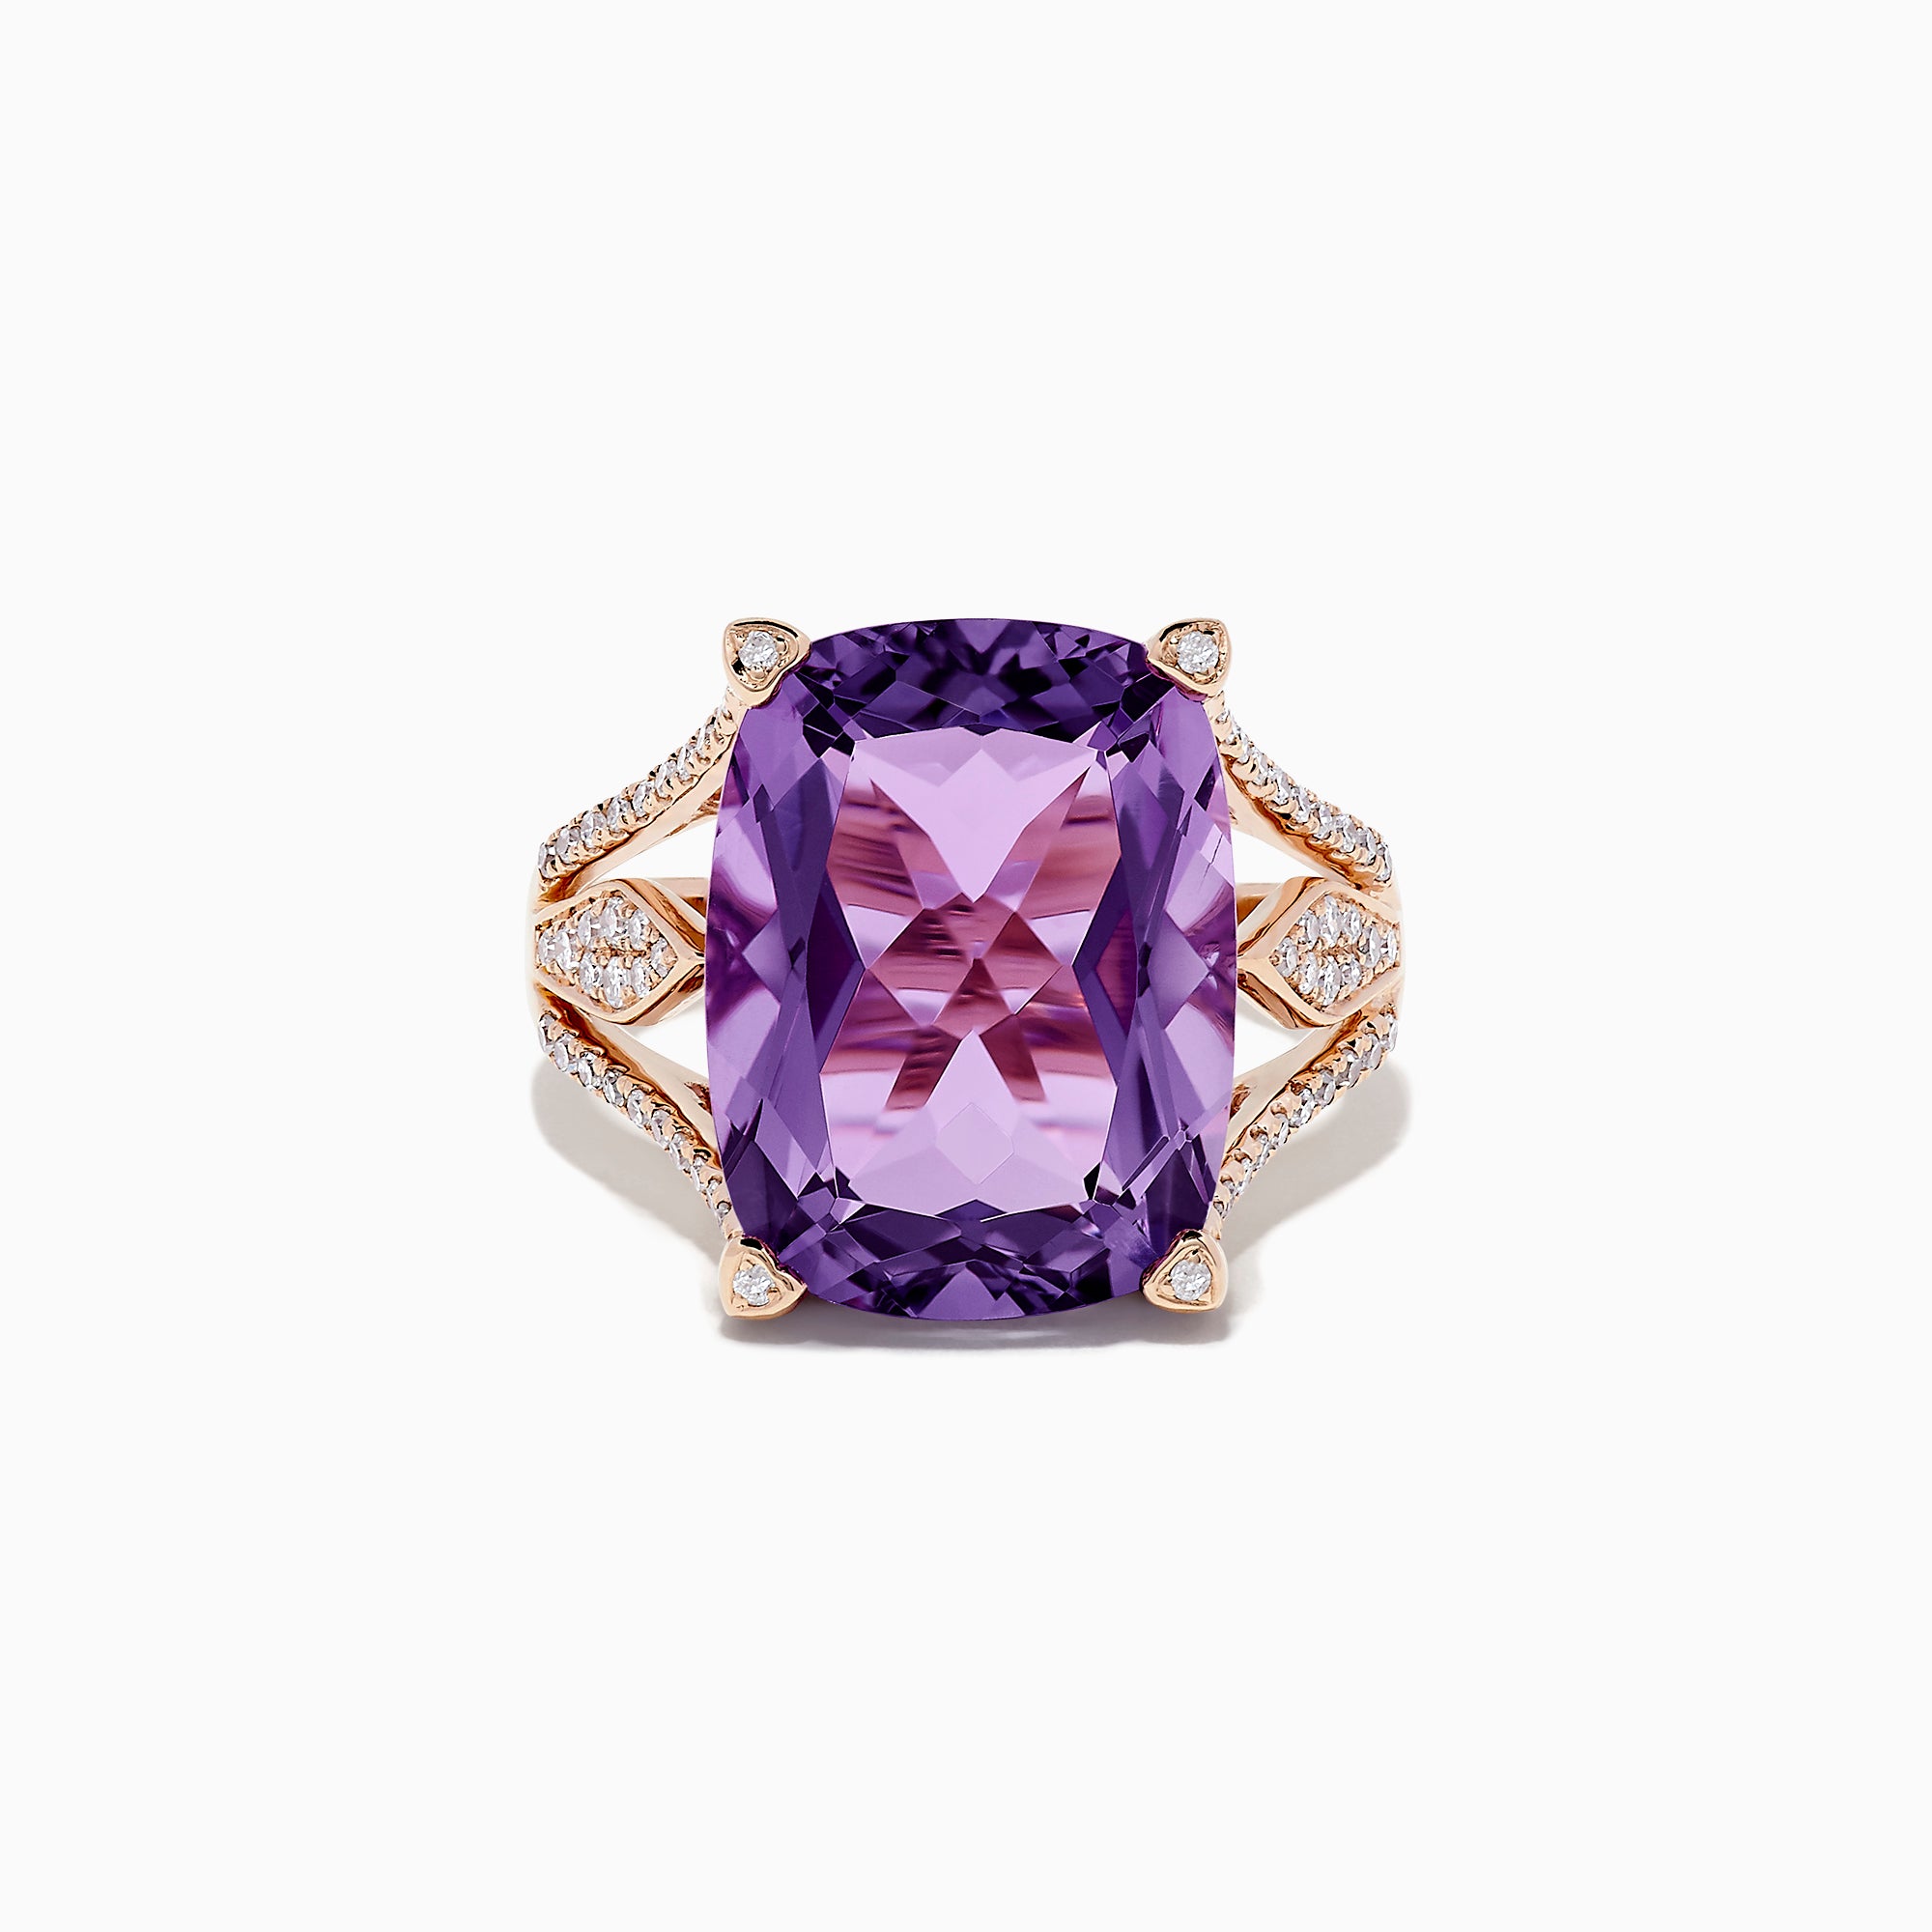 Effy 14K Rose Gold Amethyst and Diamond Cocktail Ring, 9.86 TCW